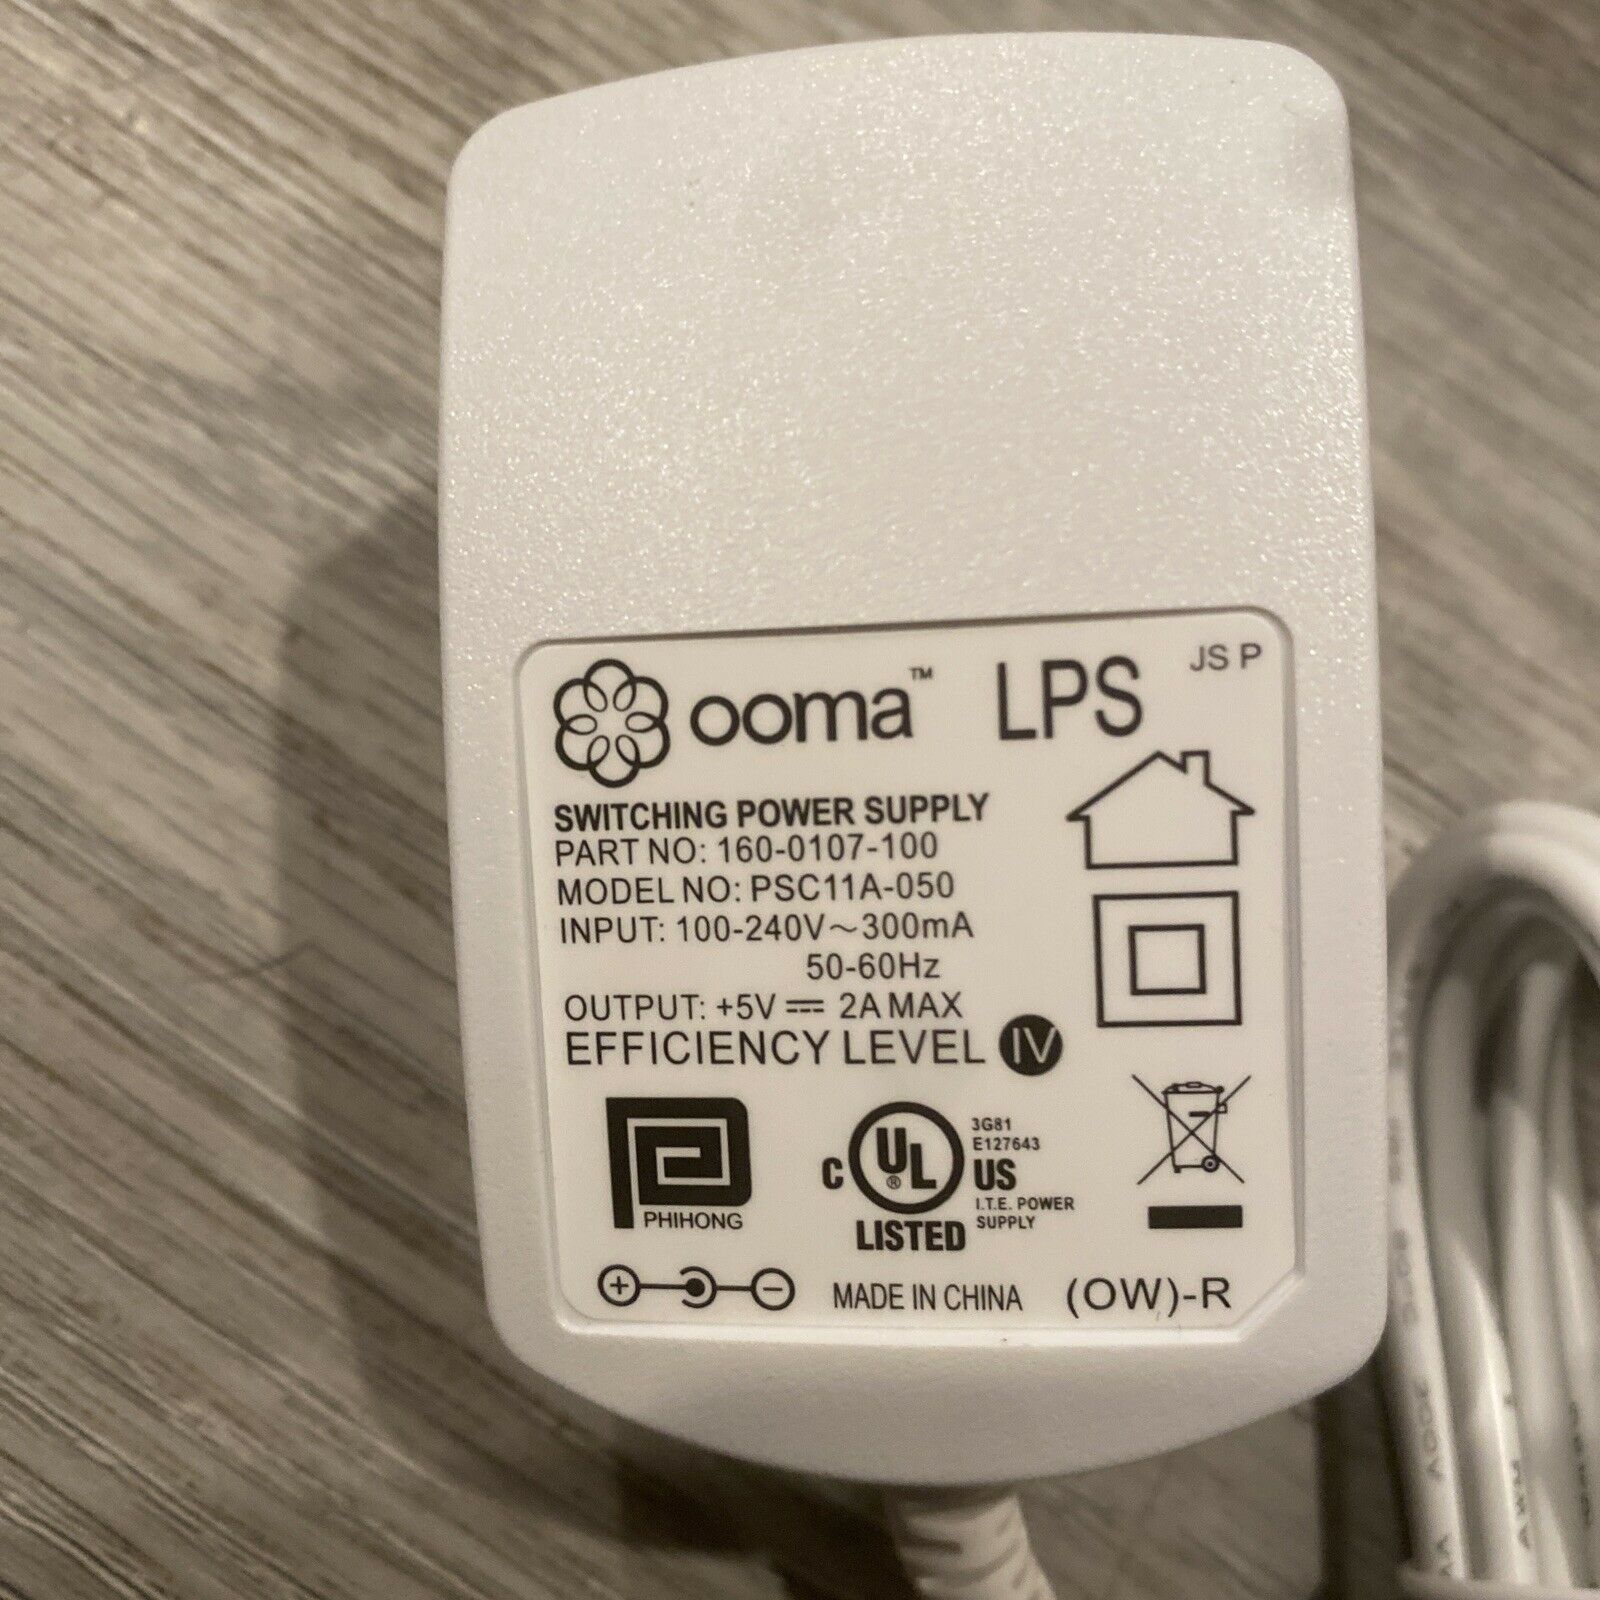 Genuine Original OEM ooma 160-0107-100 PSC11A-050 Power Supply AC Adapter 5V 2A Brand: ooma Type: Adapter Connection